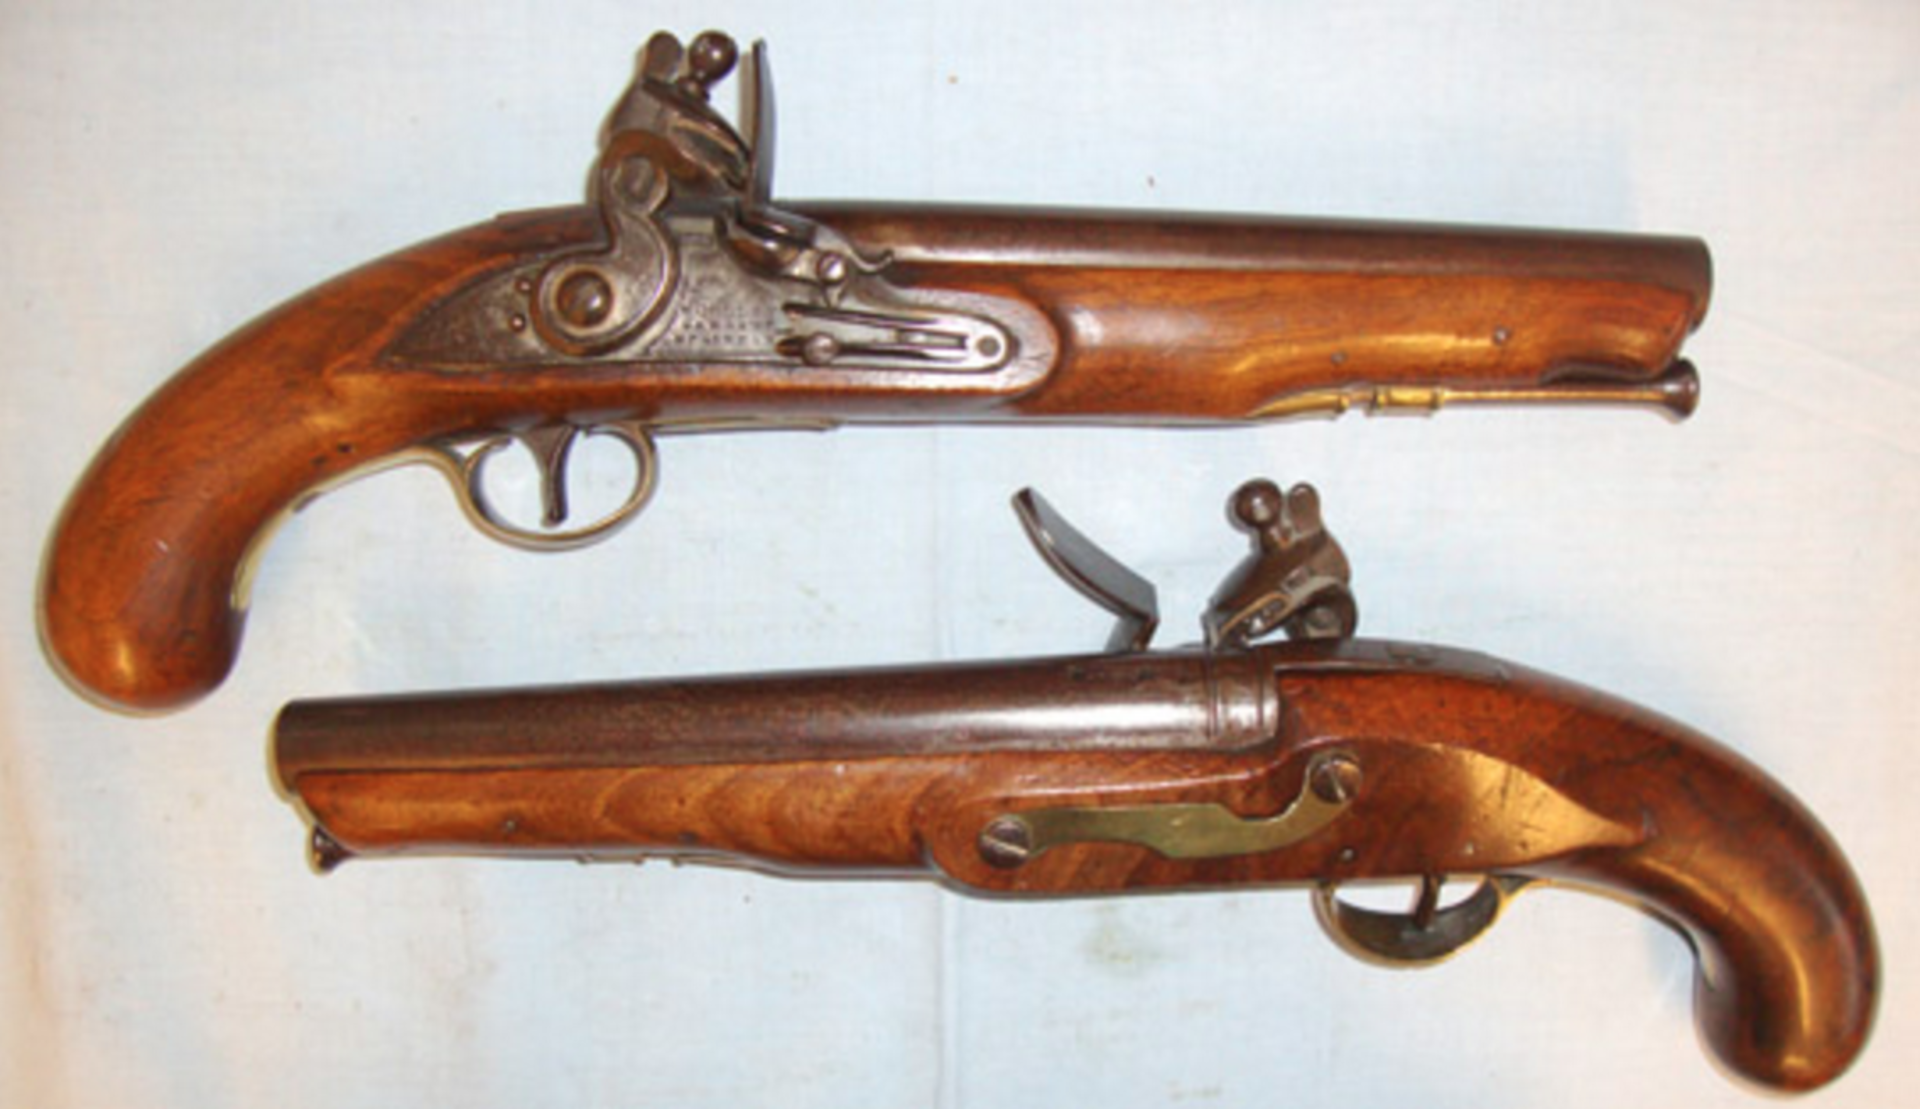 MINT, 1829- 1830 Matching Pair Of English Officer’s Private Purchase 1796 Pattern Pistols